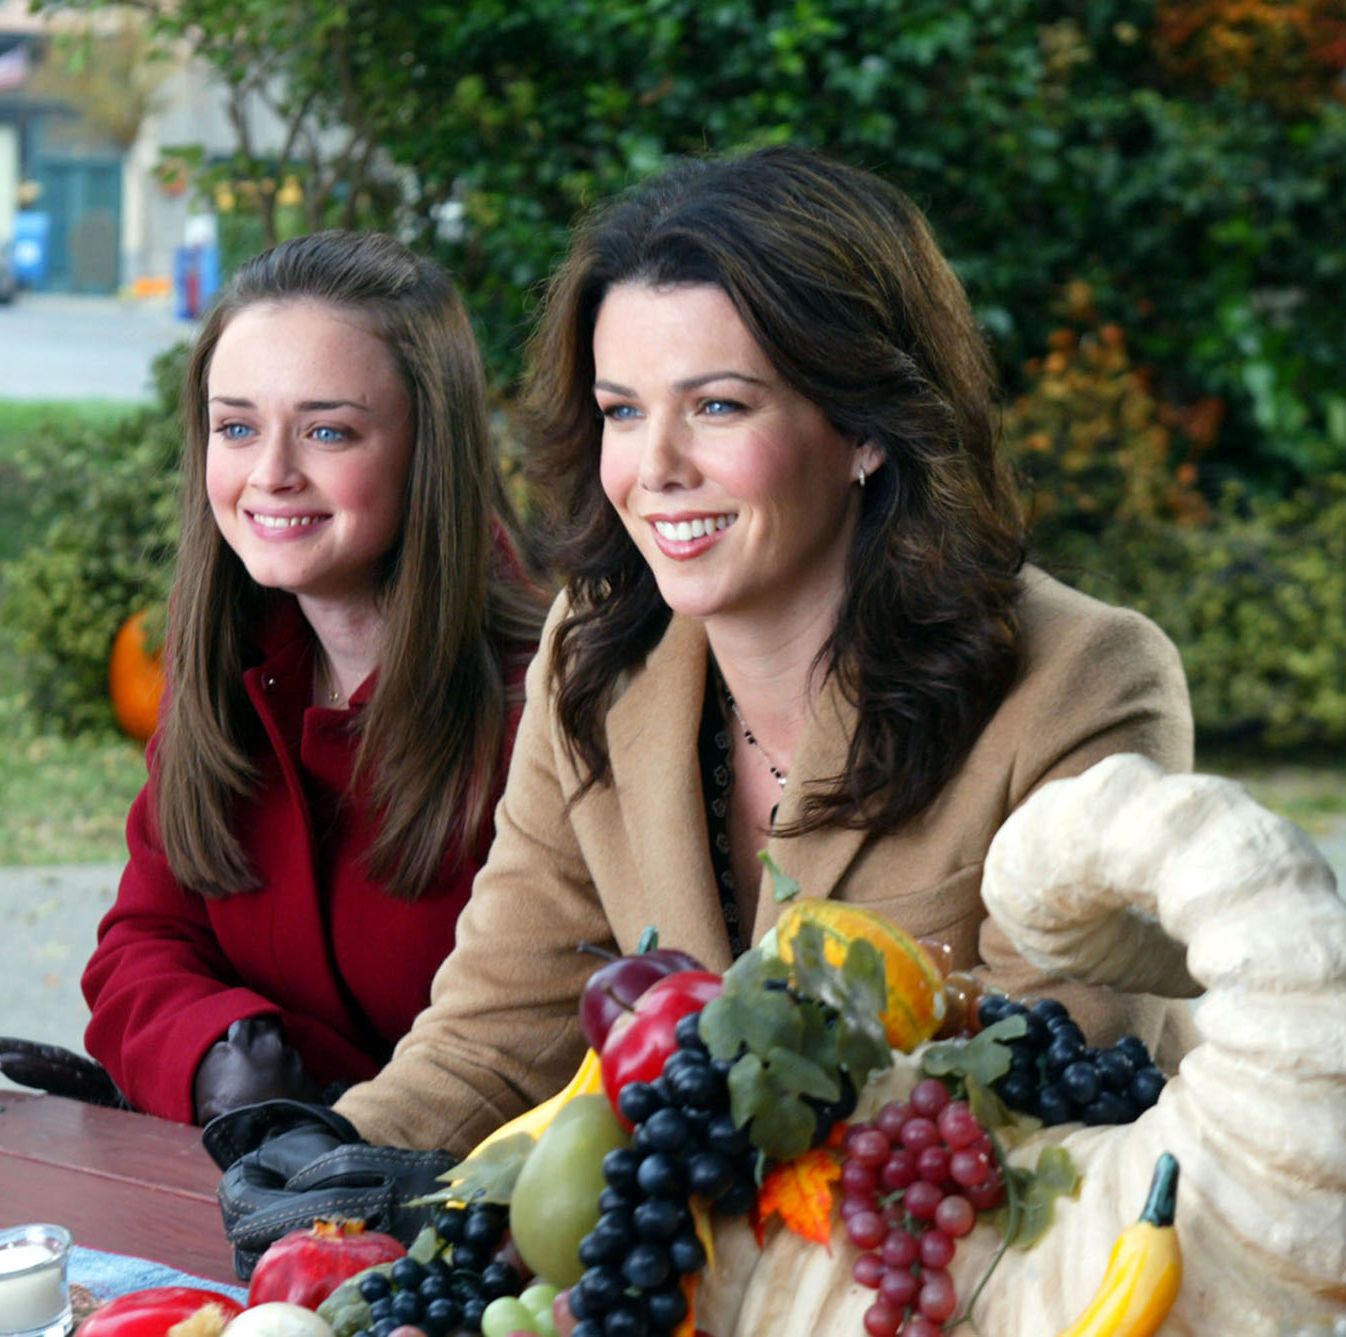 Here's the *Real* Reason Why Rory Didn't Attend Harvard on 'Gilmore Girls'